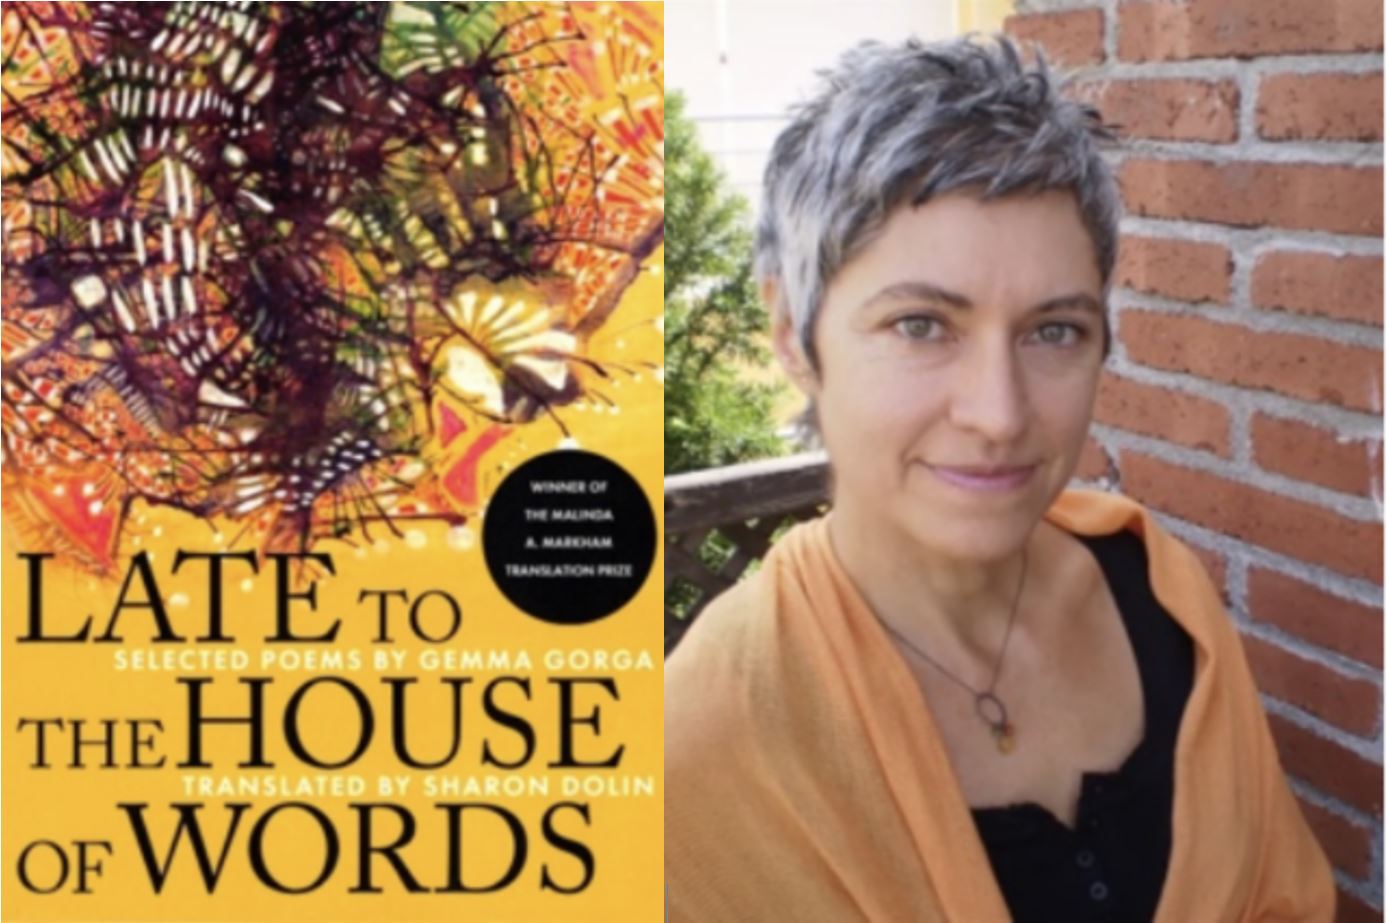 Gemma Gorga has been shortlisted for 'Late to the House of Words' (courtesy of The Griffin Trust For Excellence In Poetry)